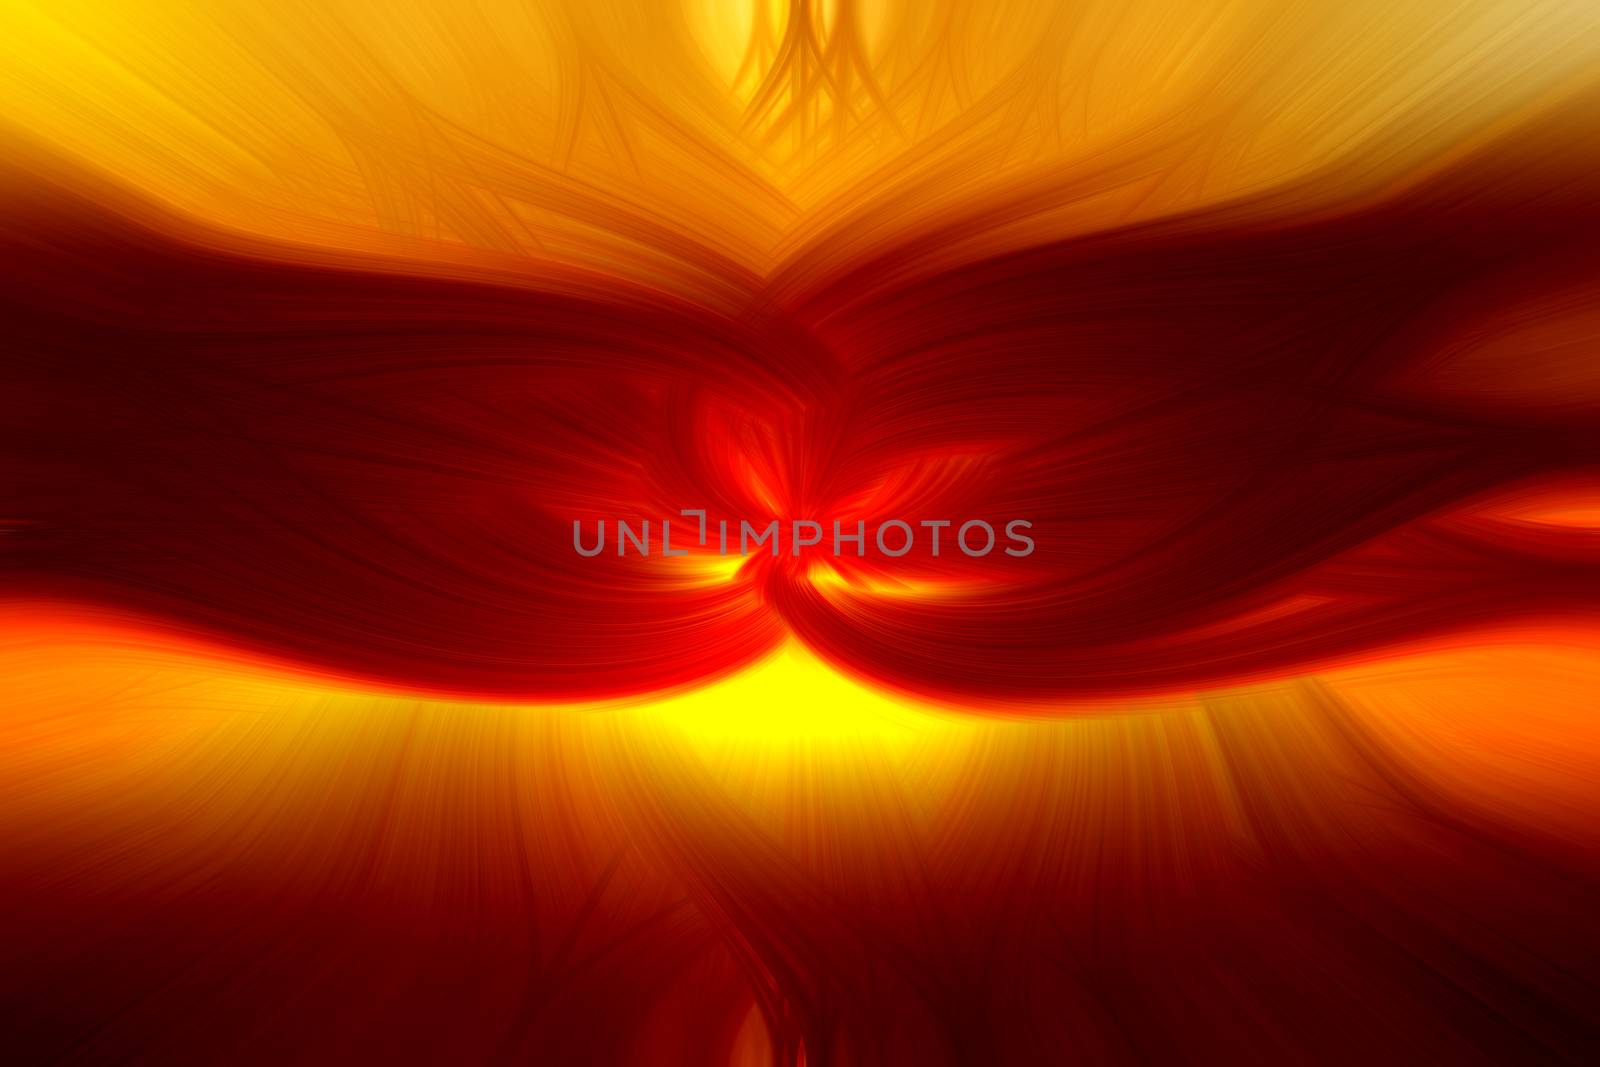 Intertwined fibers forming a shape of flame by DamantisZ